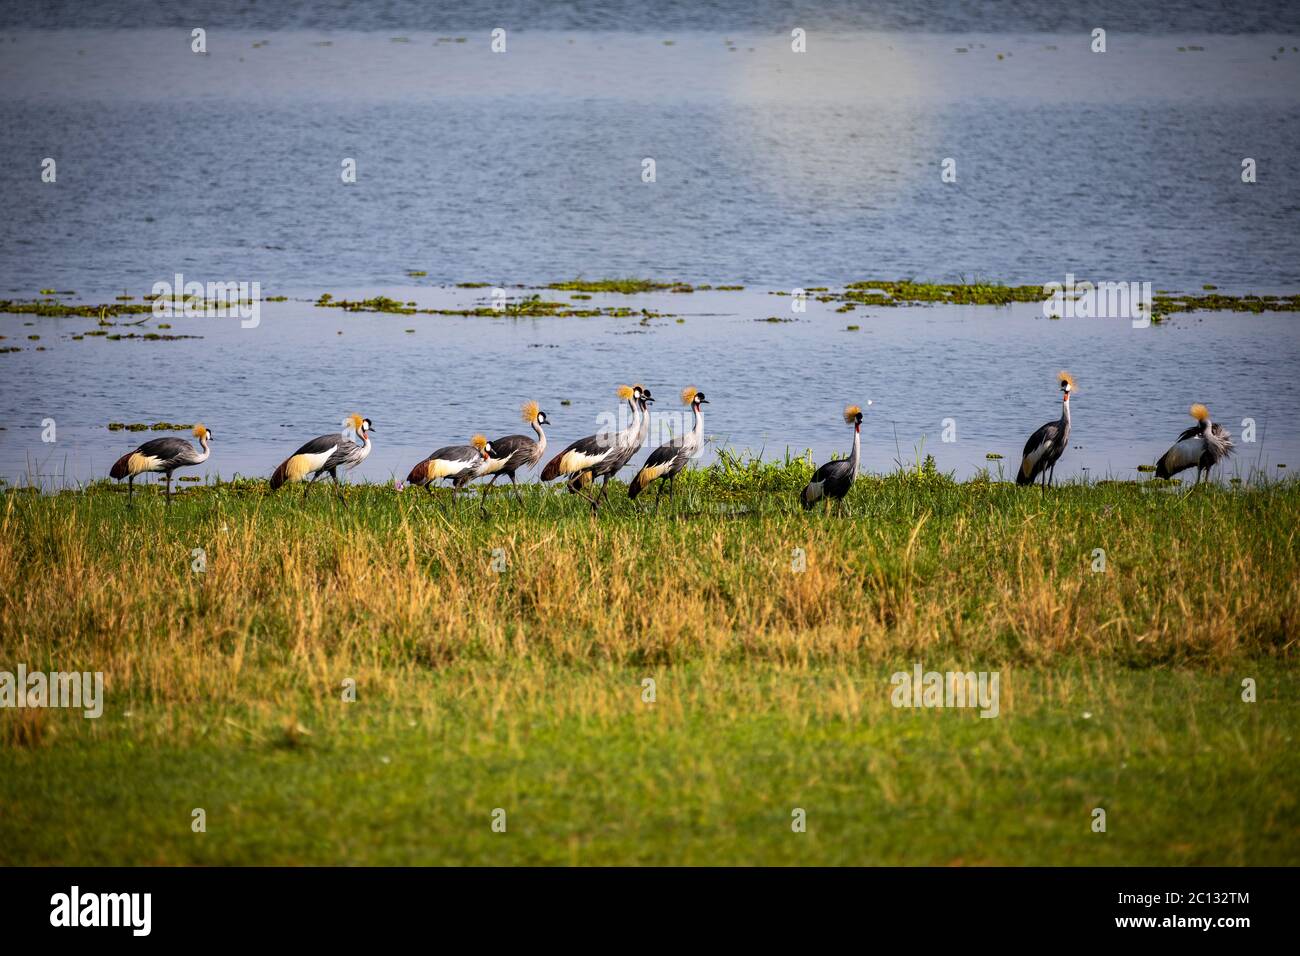 Grey Crowned Crane or crested crane (Balearica regulorum gibbericeps) flock by the river Nile in Murchison Falls National Park, Uganda Stock Photo